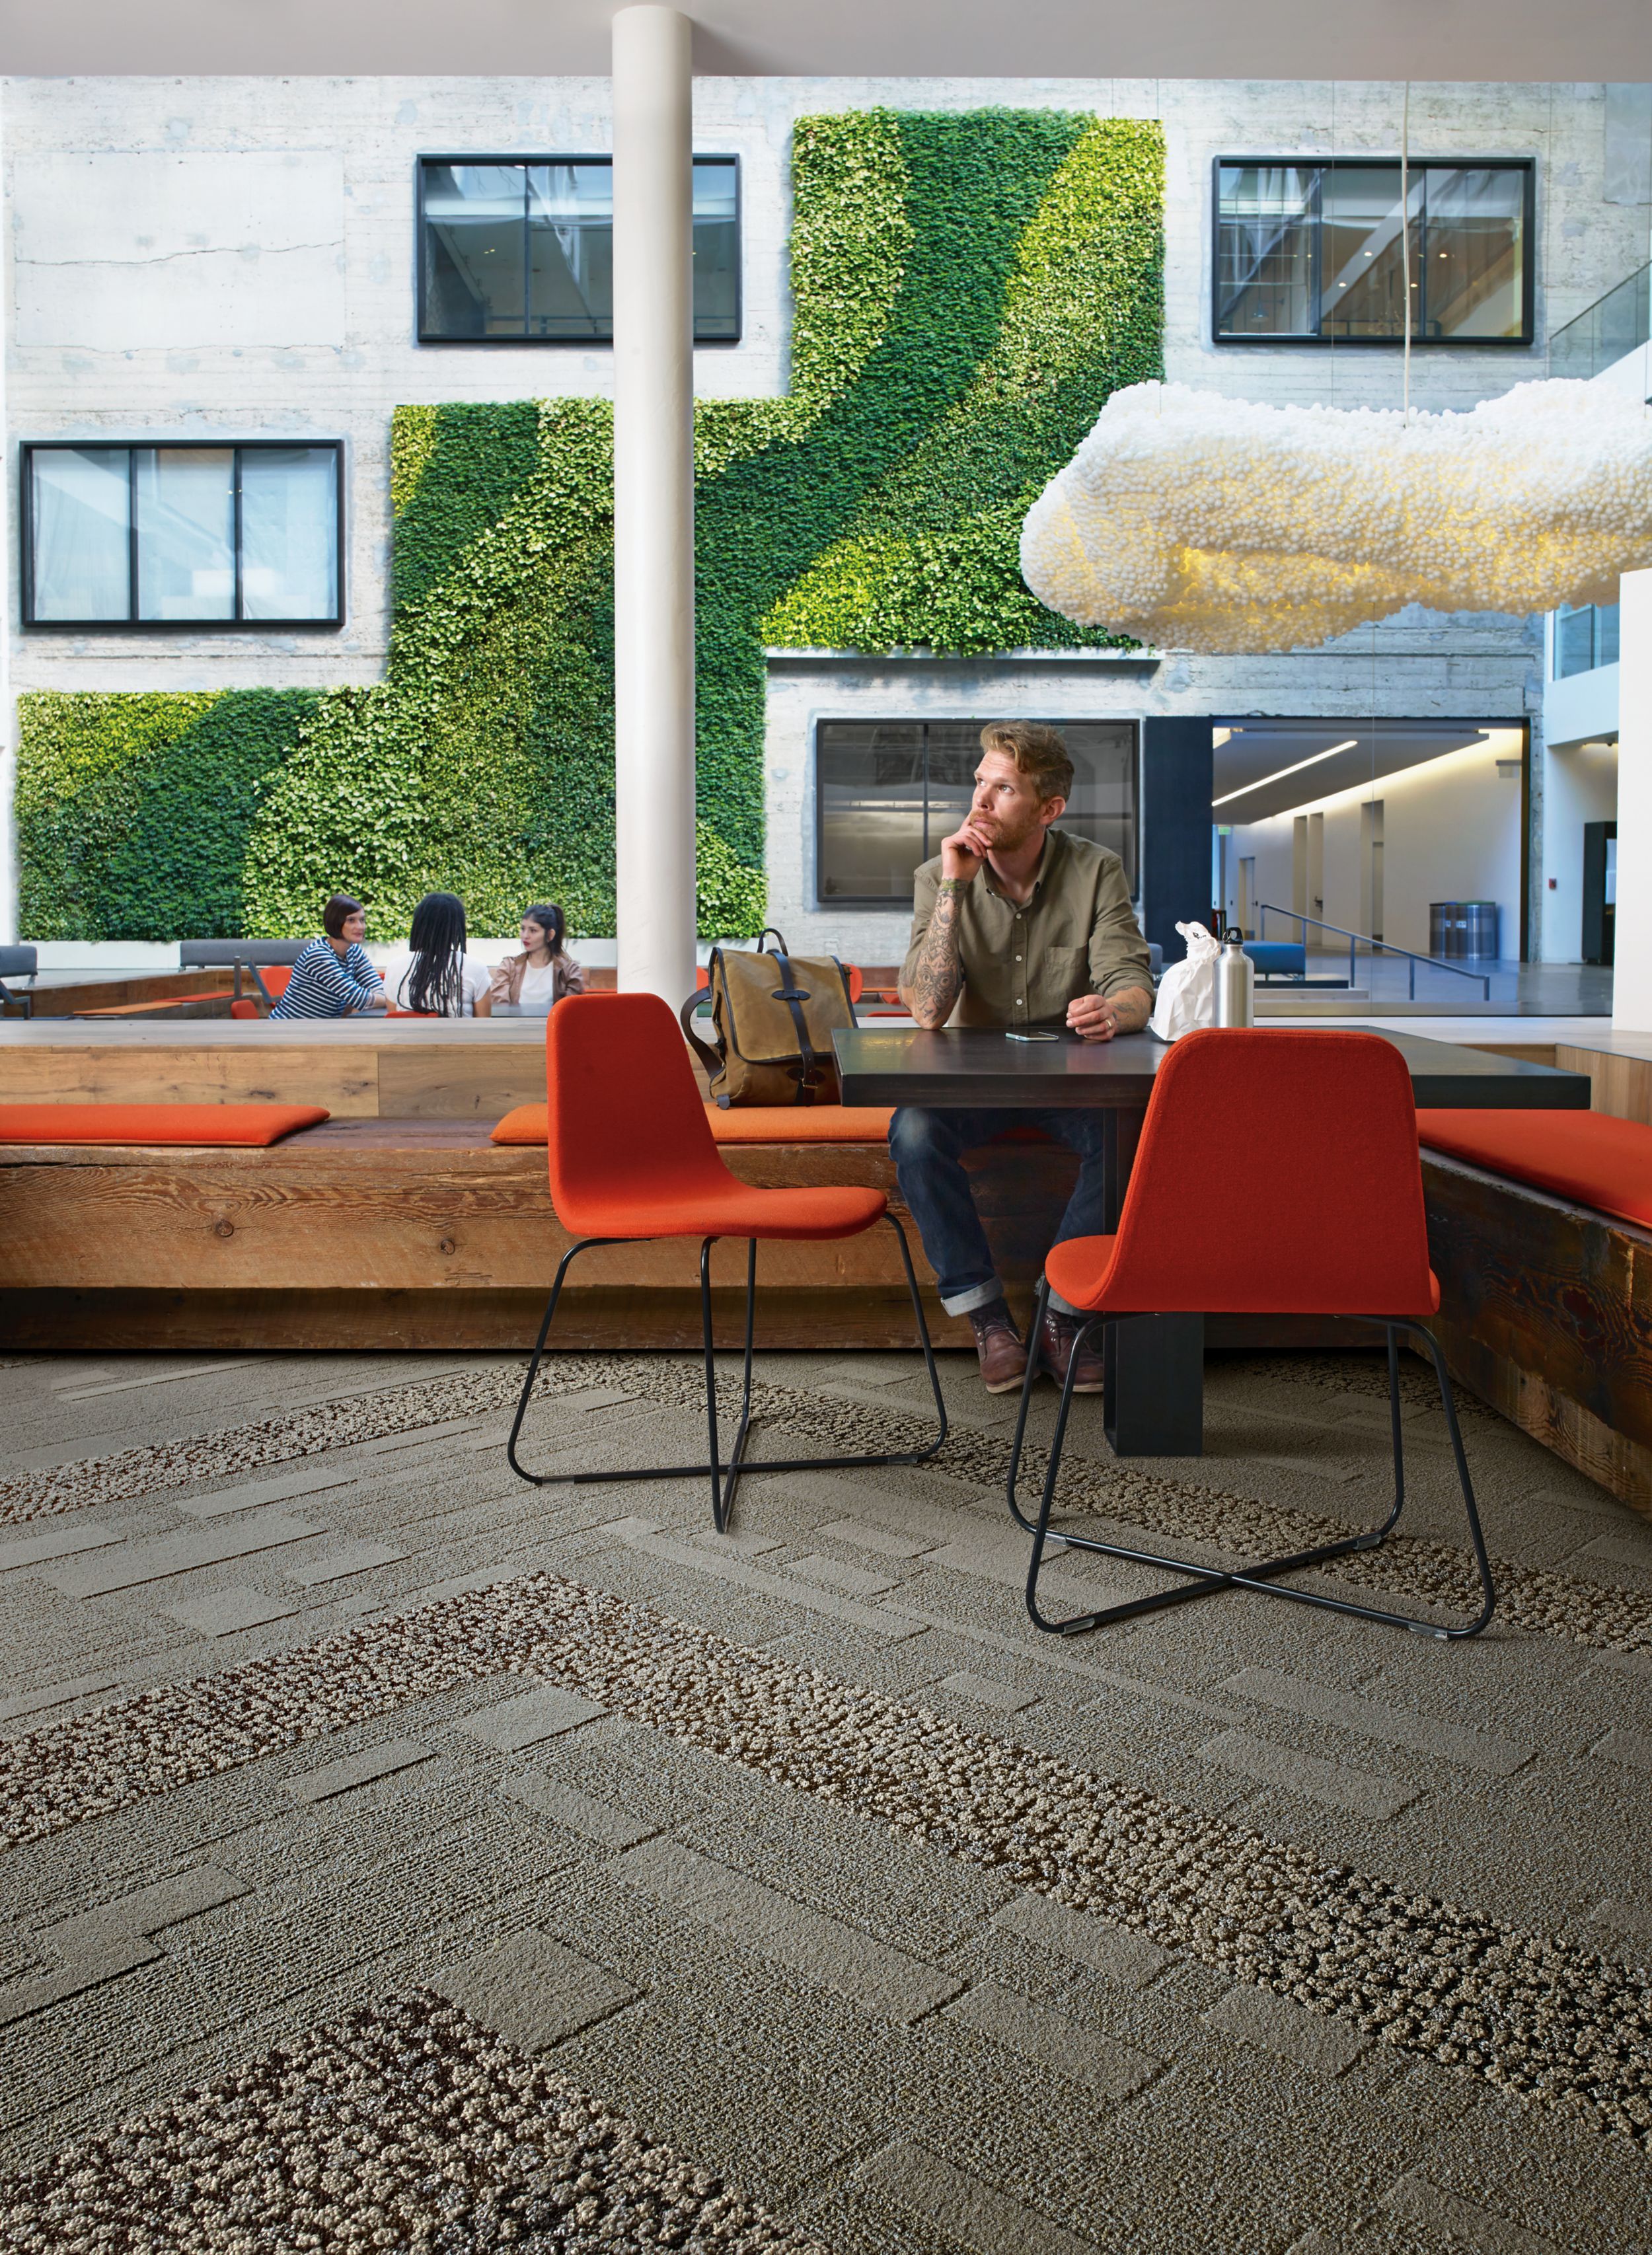 image Interface EM552 plank carpet tile with man sitting at table with lunch and group meeting in front of vine wall in the background  numéro 3